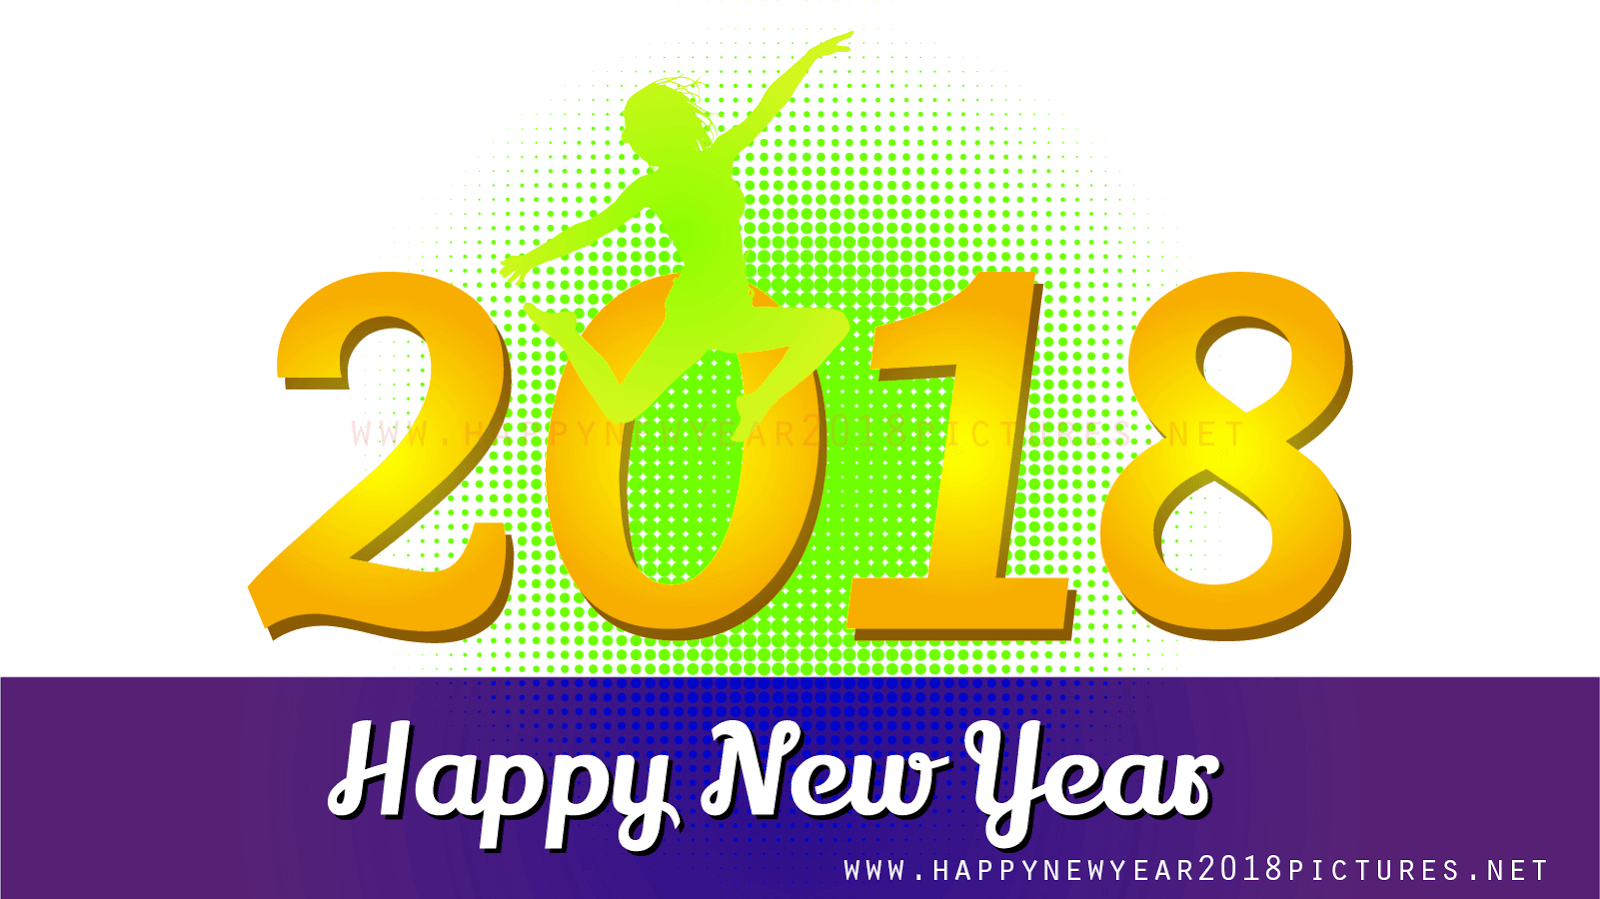 Free Download*}Happy New Year 2018 Top Picture Image Photo HD